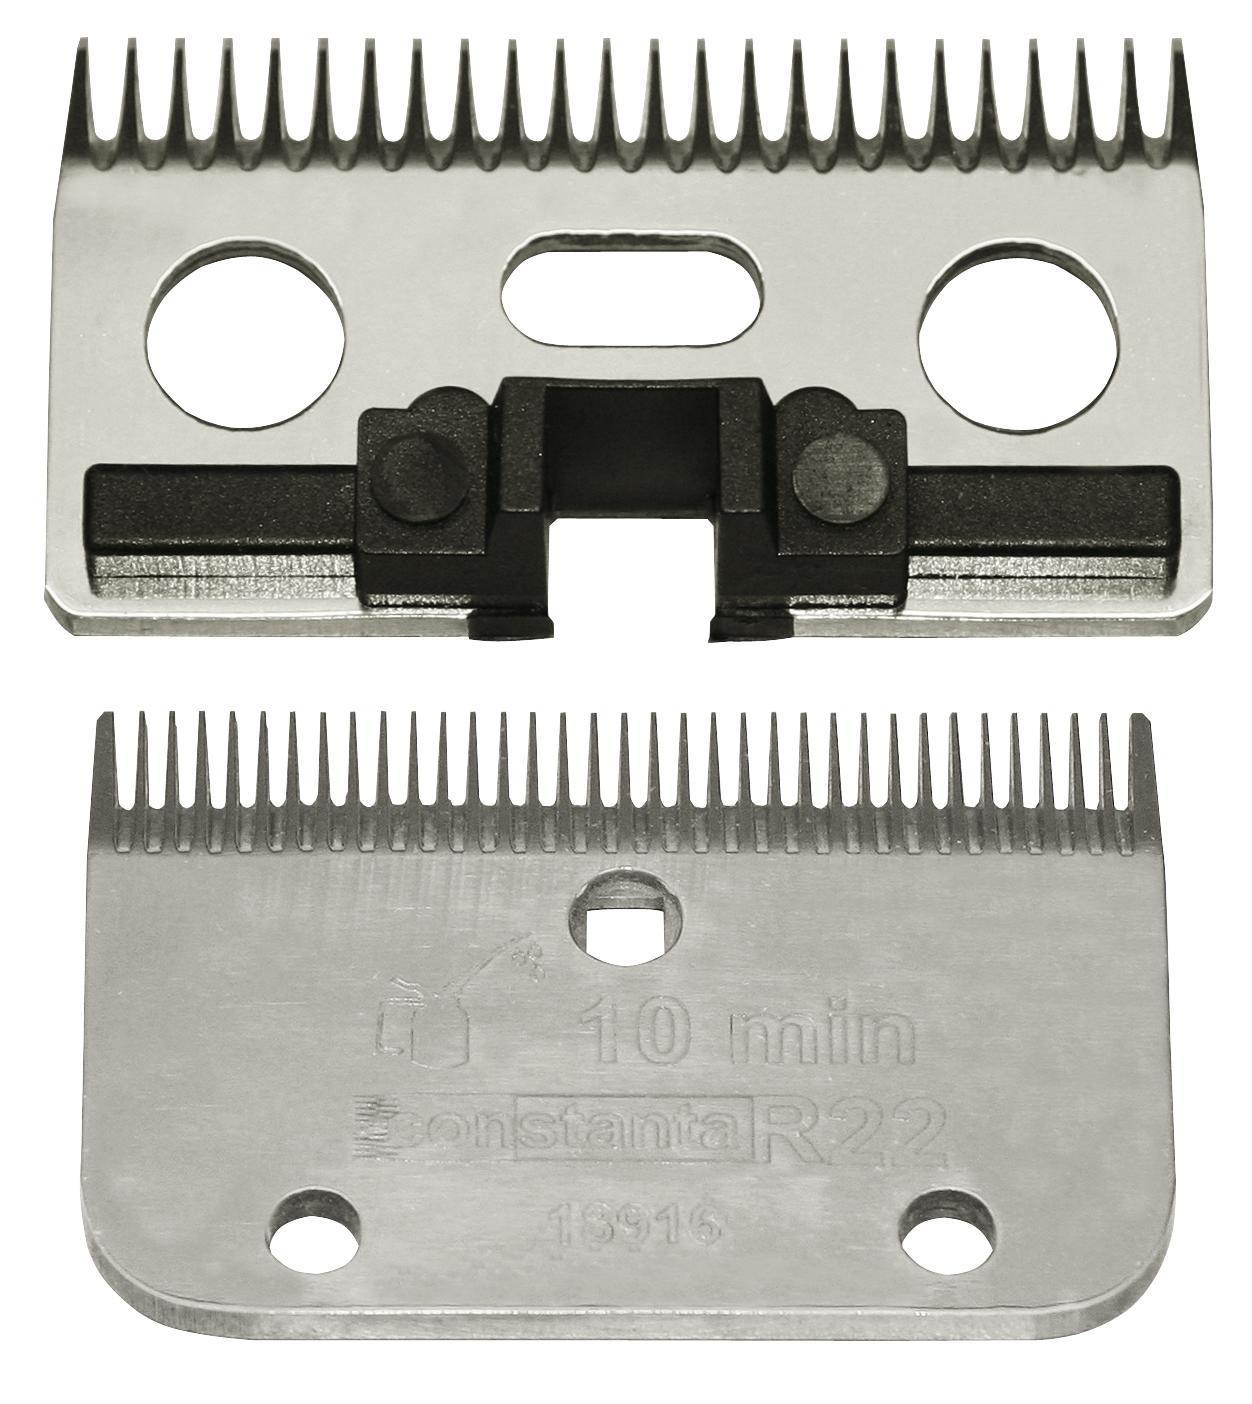 Rodeo R22 0,5 mm, 35/24 T, blade for horse shears